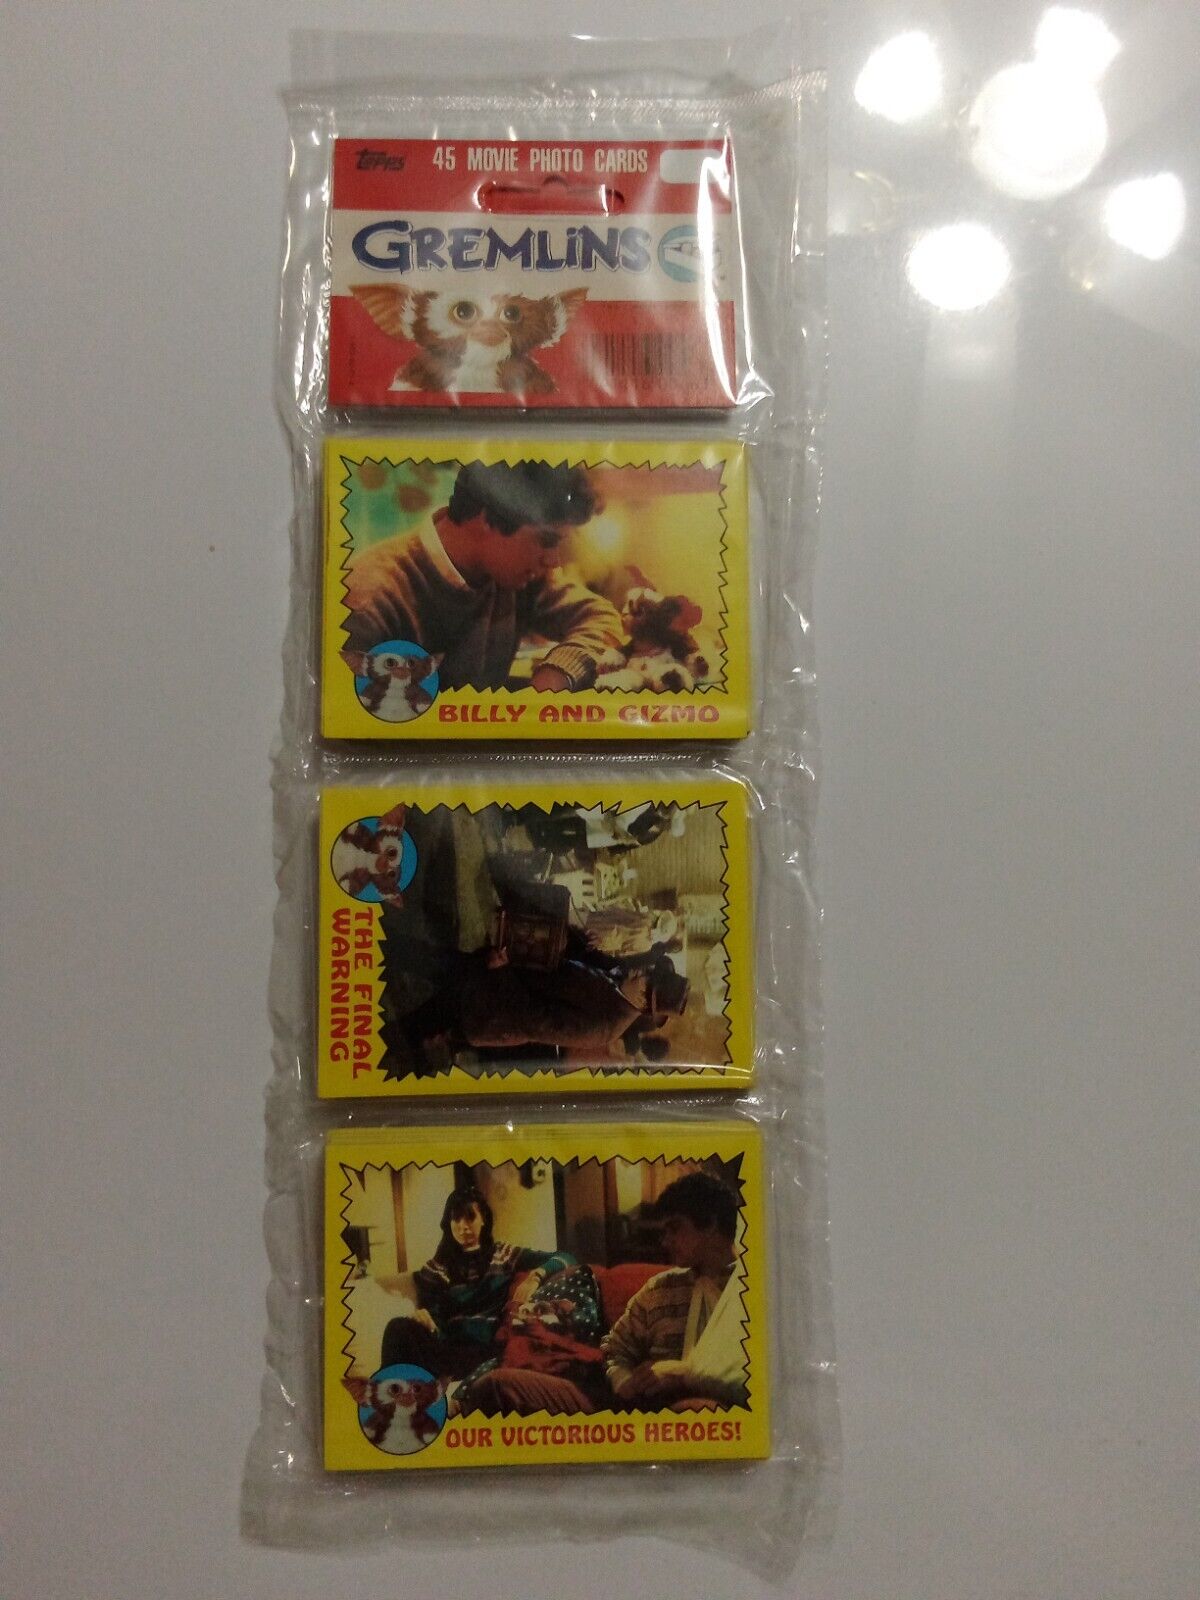 1984 Topps Gremlins 45 Movie Photo Cards